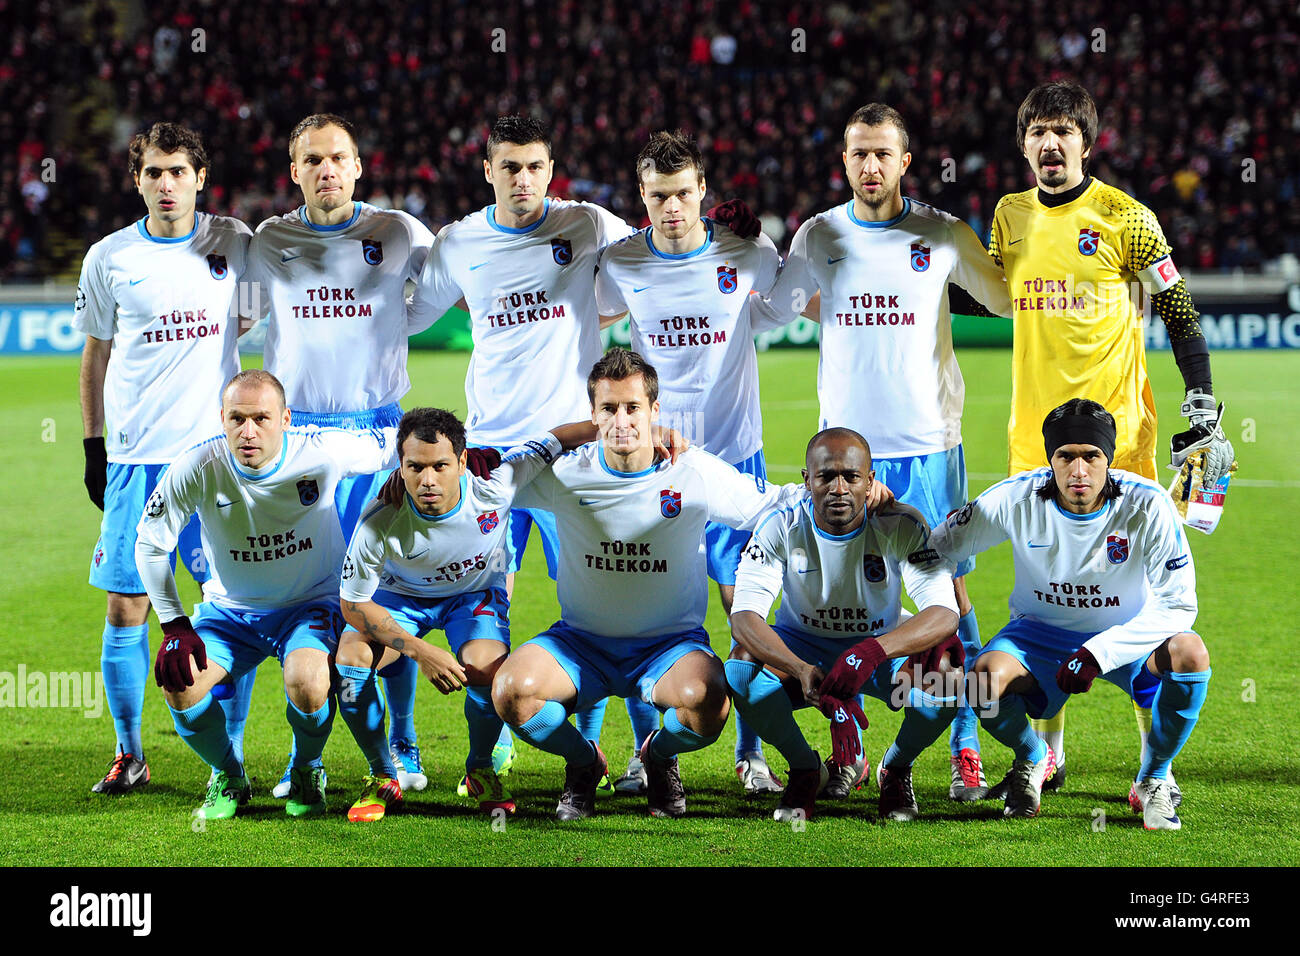 Soccer - UEFA Champions League - Group B - Lille v Trabzonspor - Stadium  Lille Metropole. Trabzonspor team group Stock Photo - Alamy